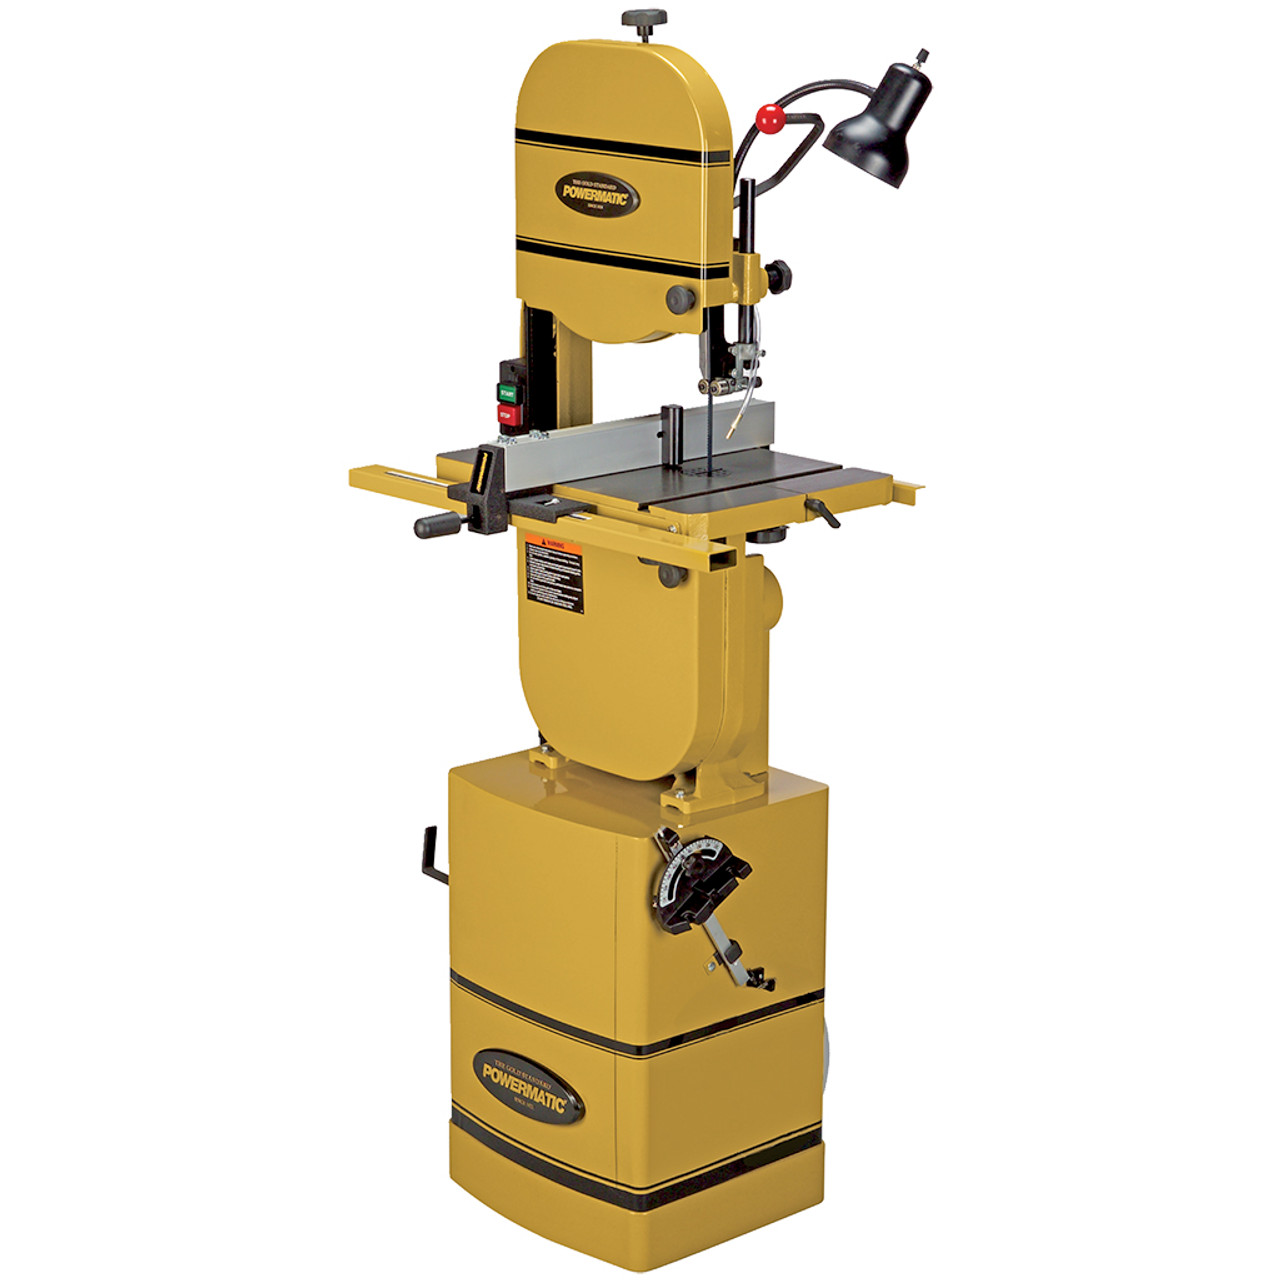 Powermatic Wood-cutting Band Saw Midwest Technology